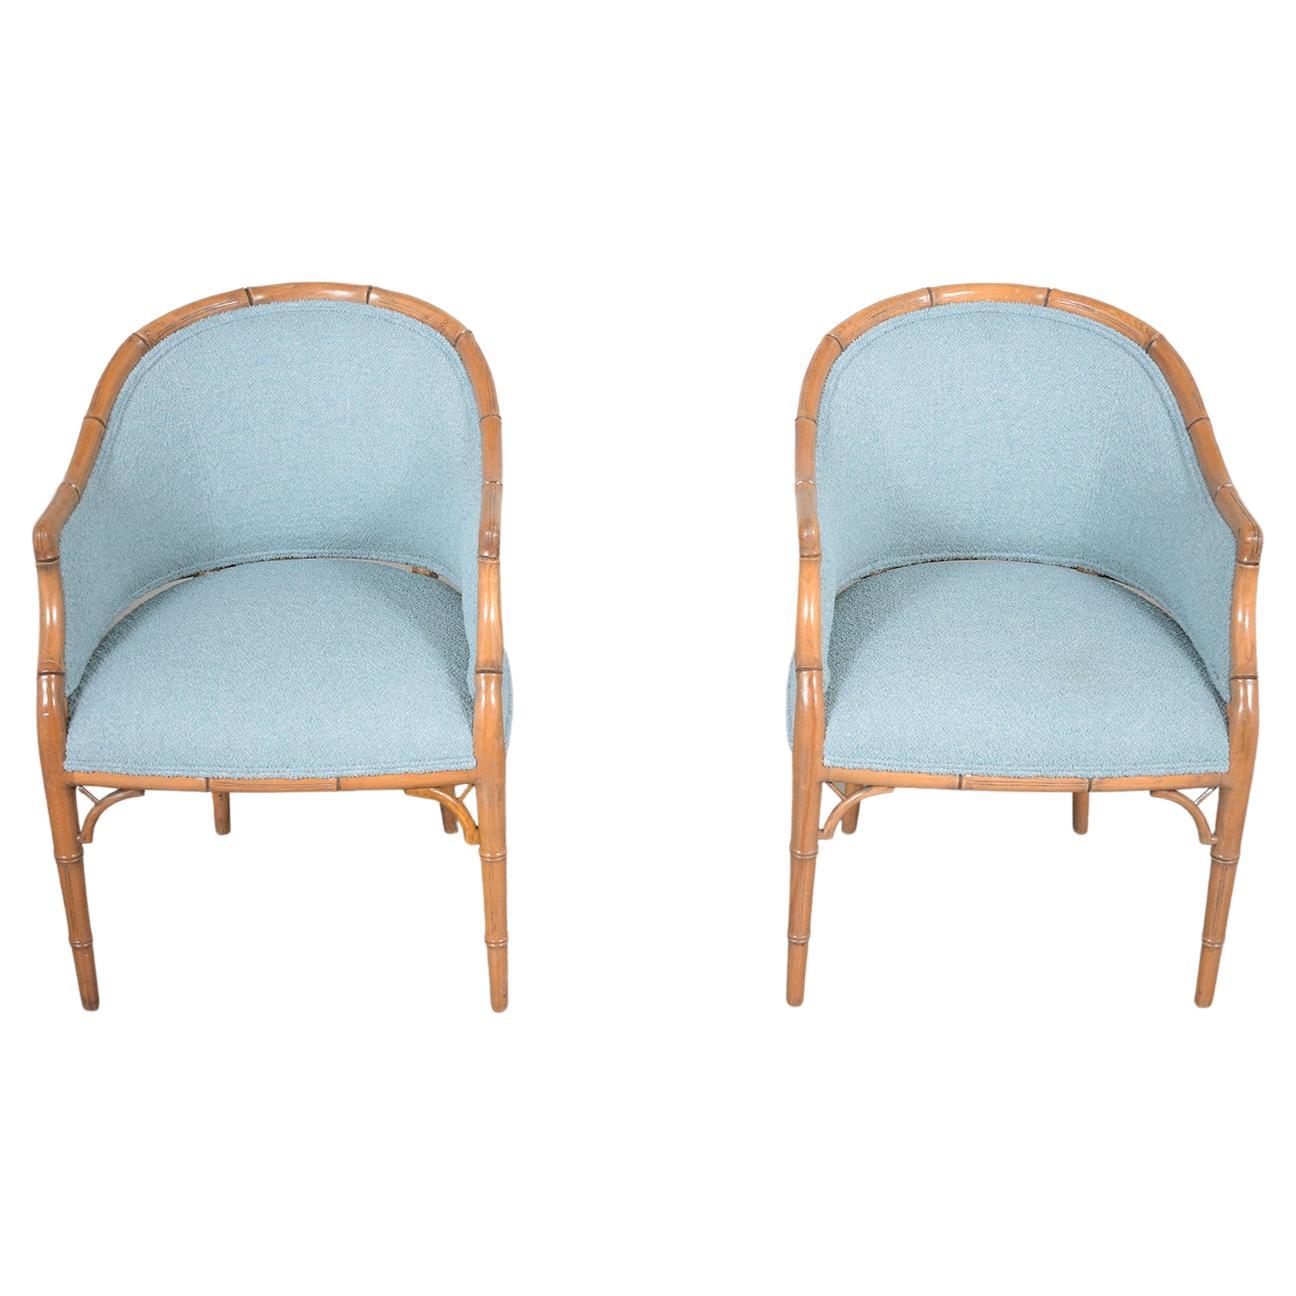 Pair of Vintage Faux Bamboo Armchairs